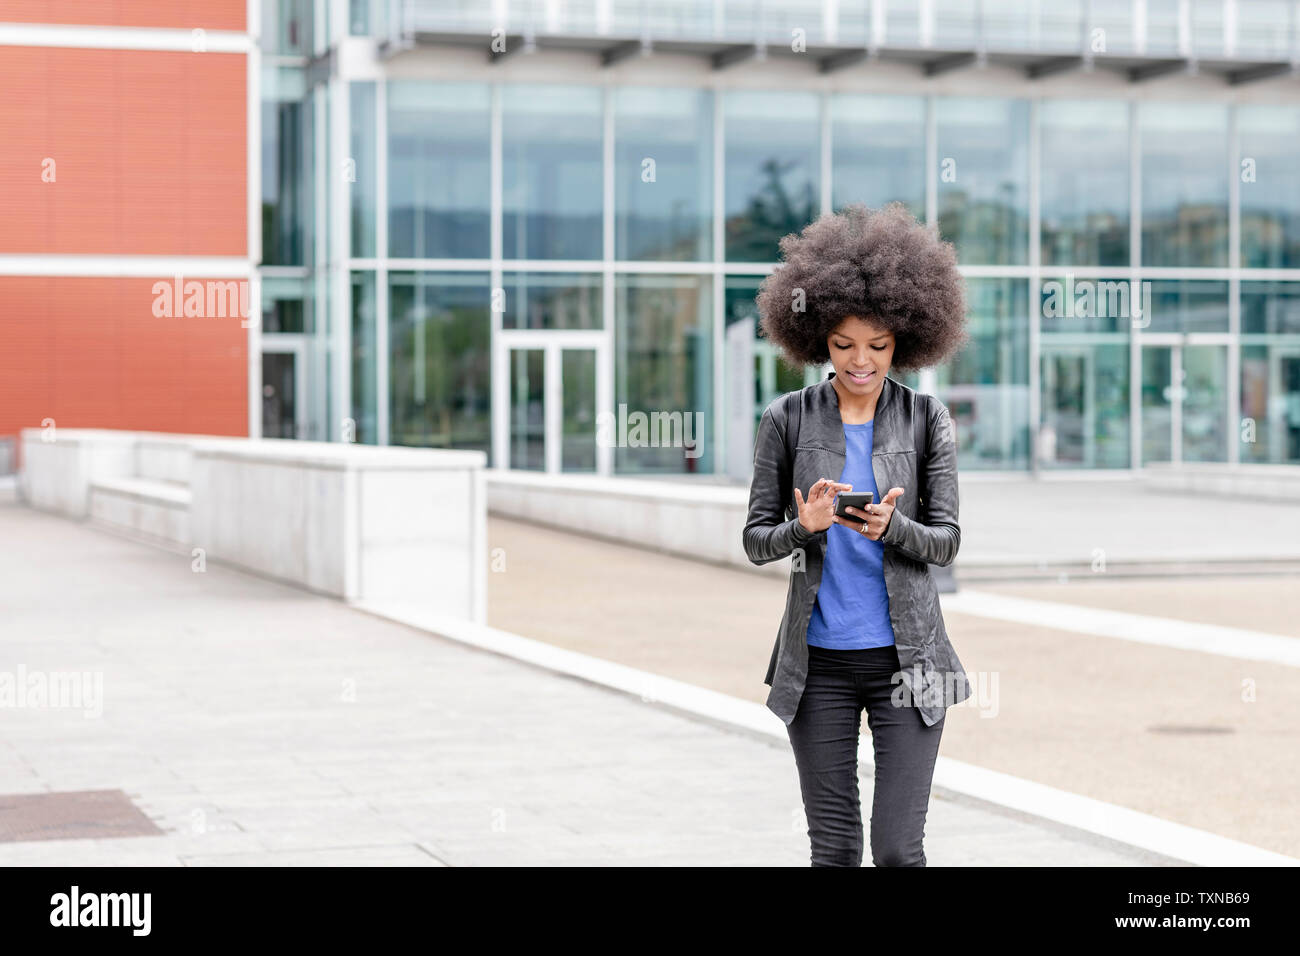 Young woman with afro hair in city, using smartphone touchscreen Stock Photo